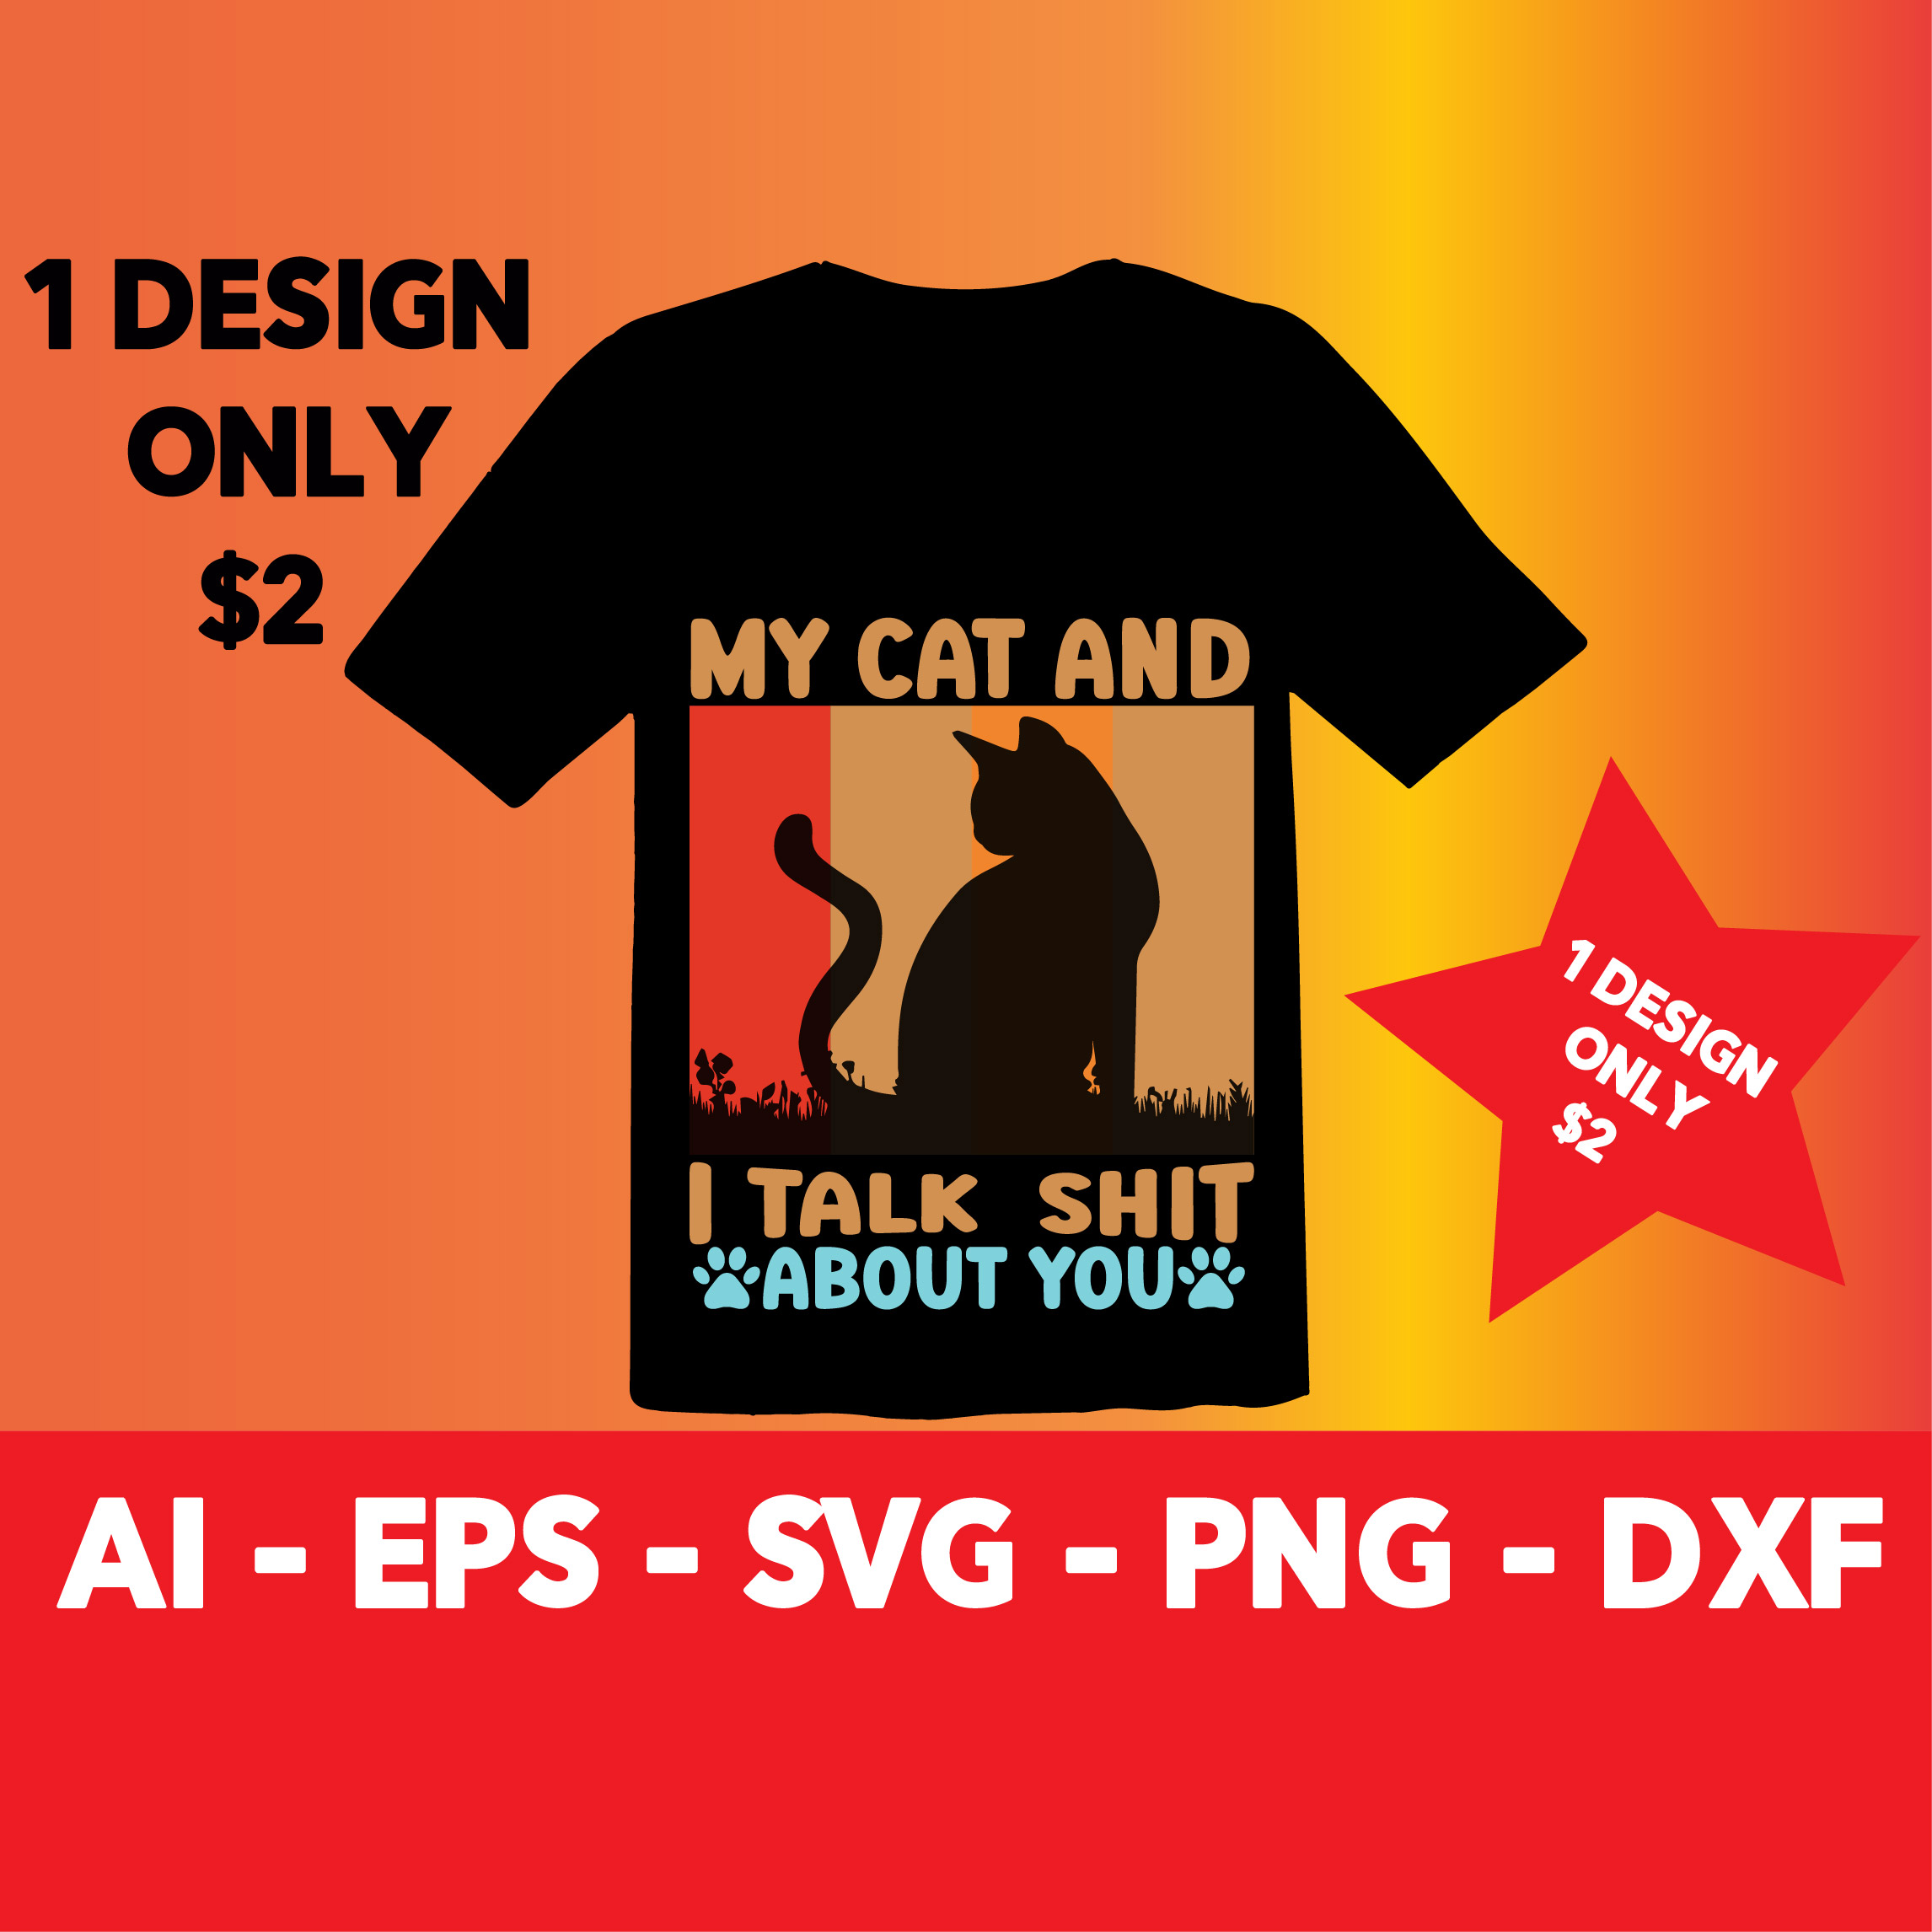 Image of t-shirt with wonderful print of cat silhouette